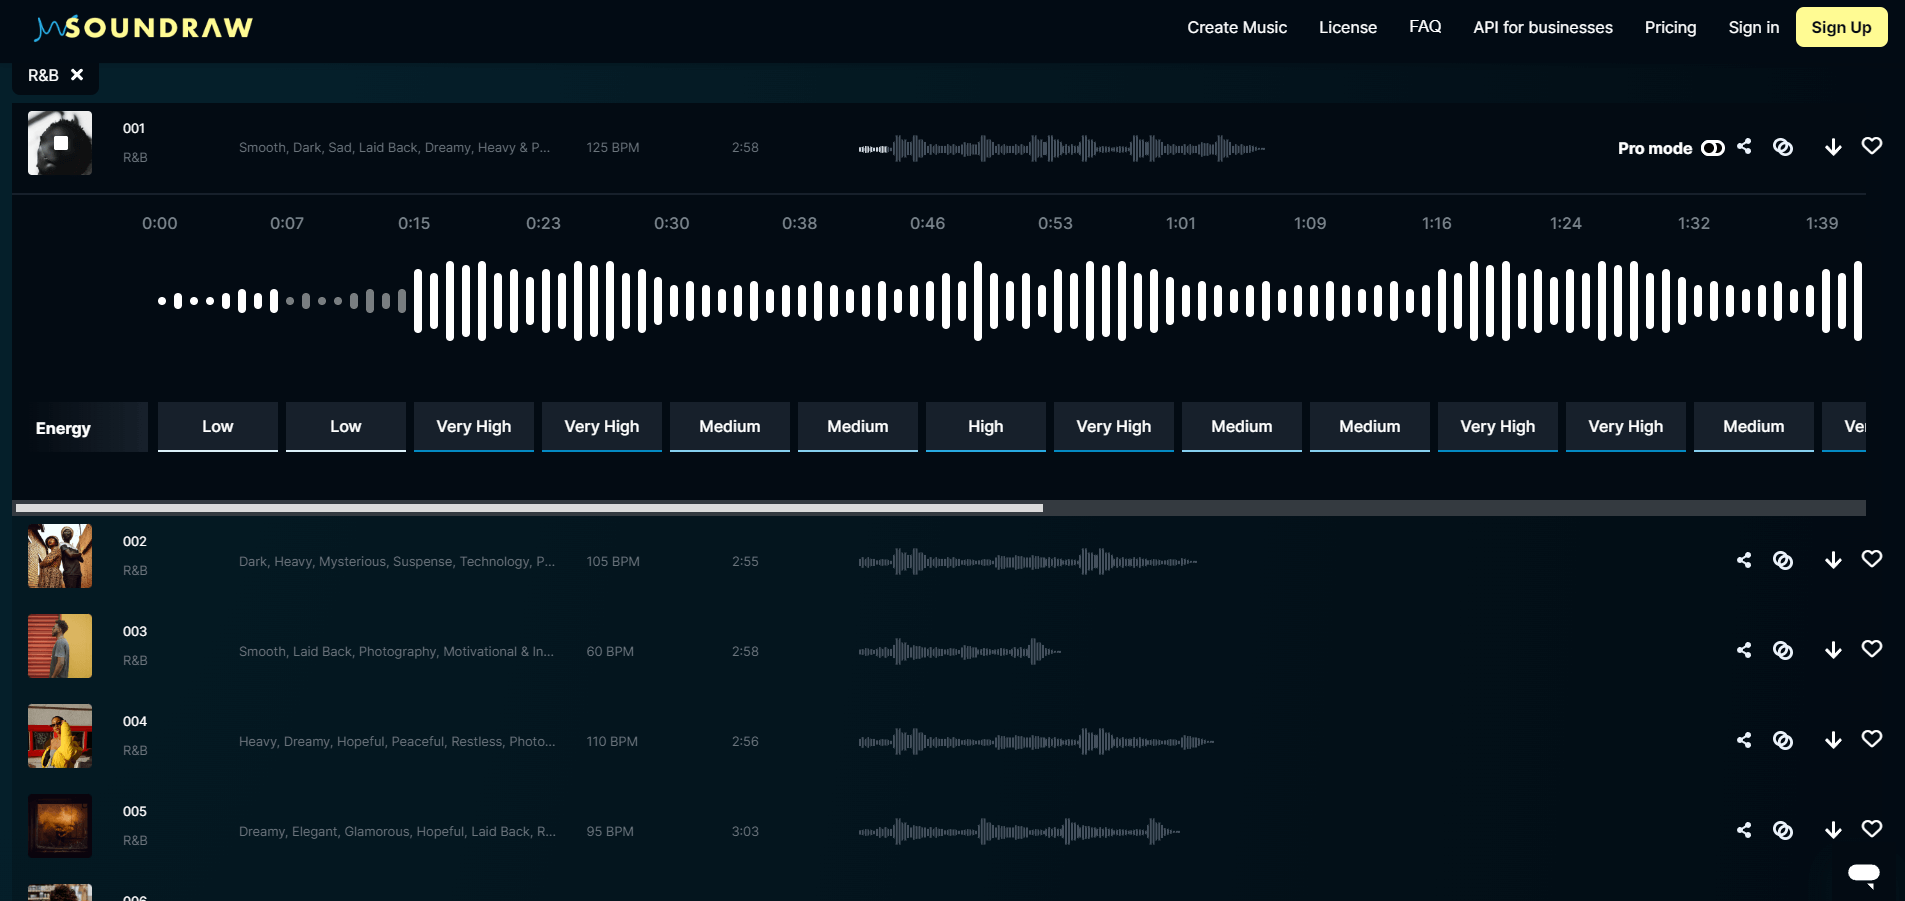 A list of AI generated R&B music tracks on Soundraw’s website